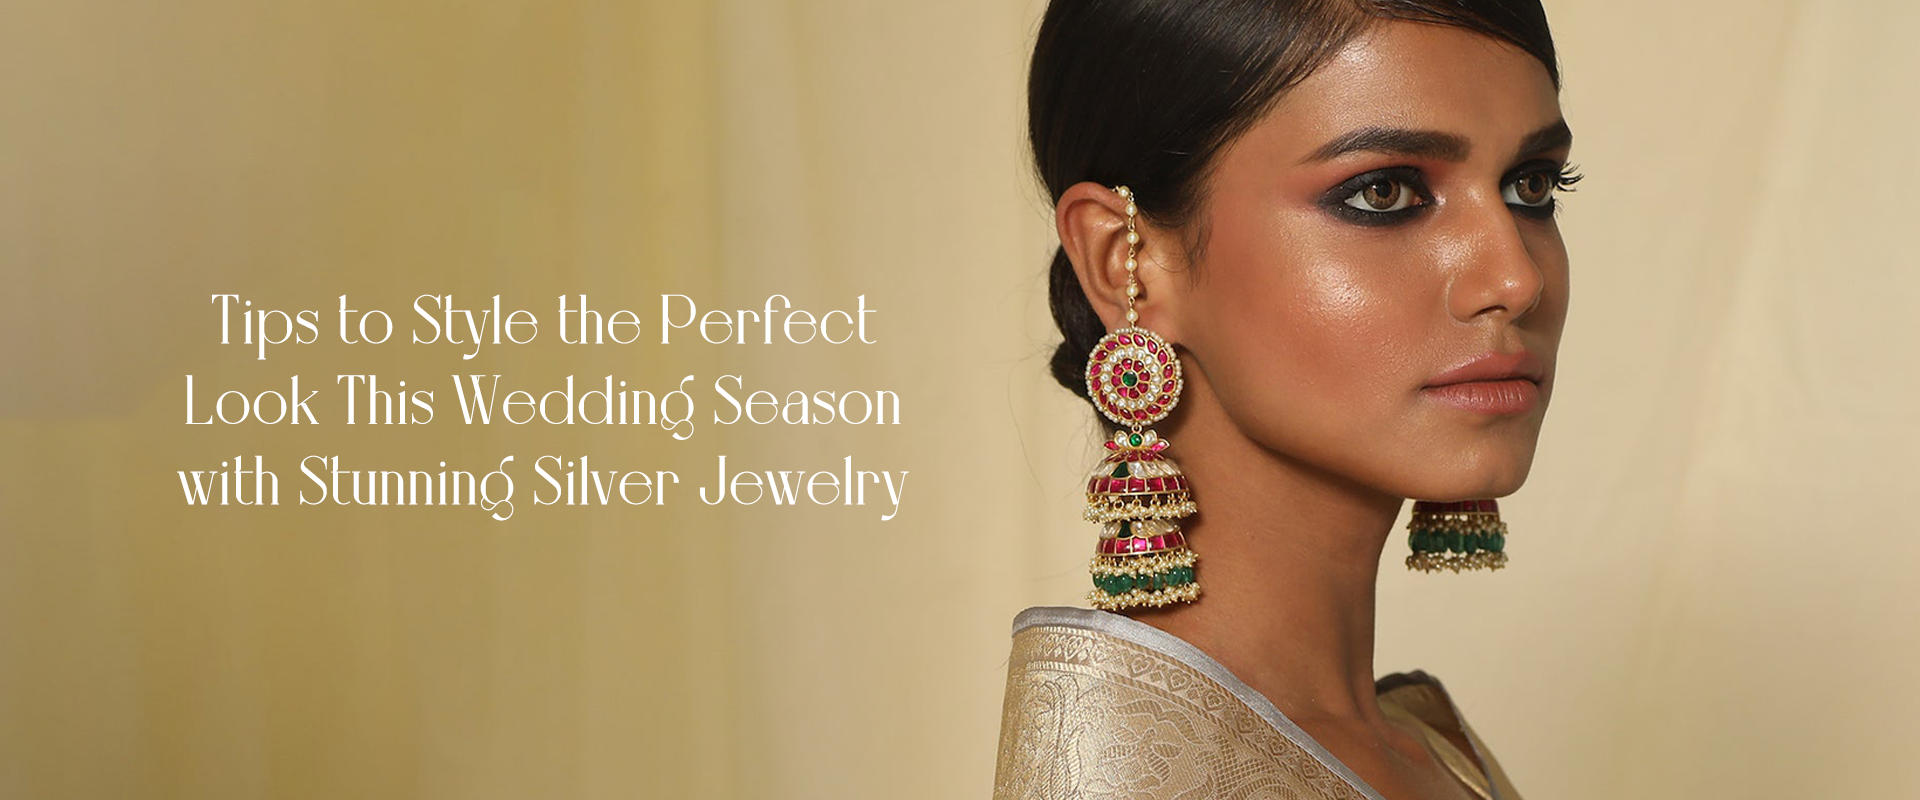 Tips to Style the Perfect Look This Wedding Season with Stunning Silver Jewelry